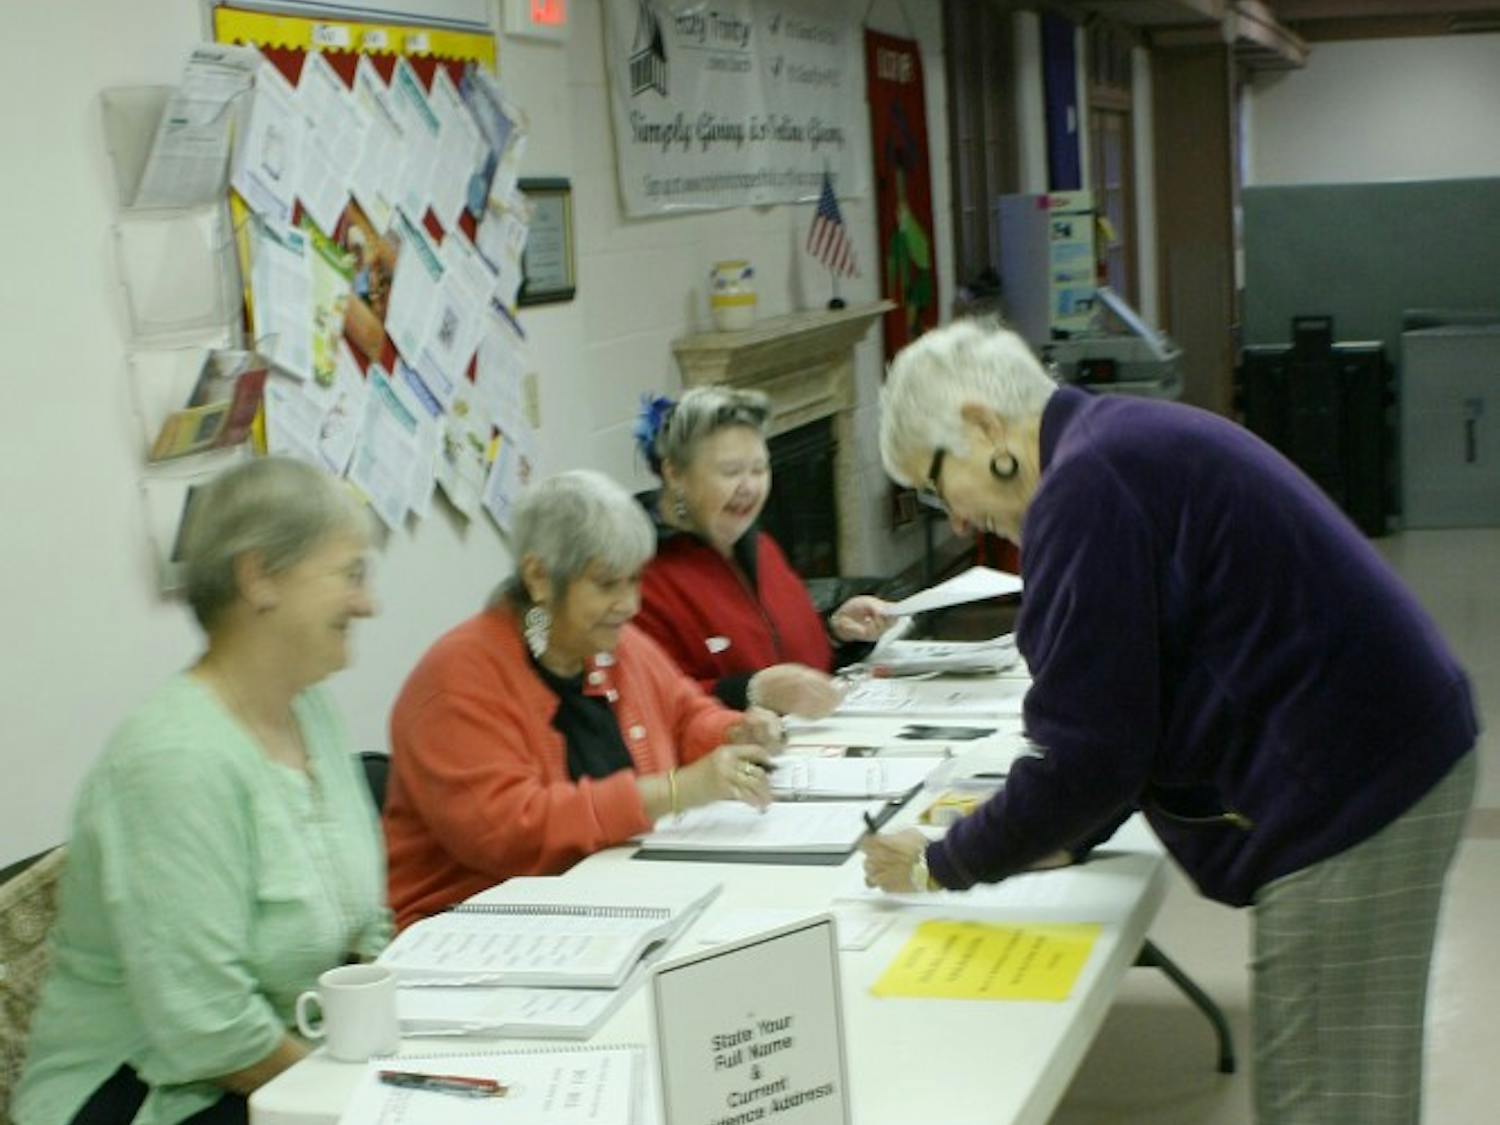 left to right: Iris Schwintzer, Shirley Ray, Ernie Quade. Judges for the E Franklin Street Precinct assist morning voters. Deborah Finn, of 214 Hillsborough St., votes with her husband and dog. (purple jacket). At larger elections, Mrs. Finn is also a judge for the E Franklin Street Precinct